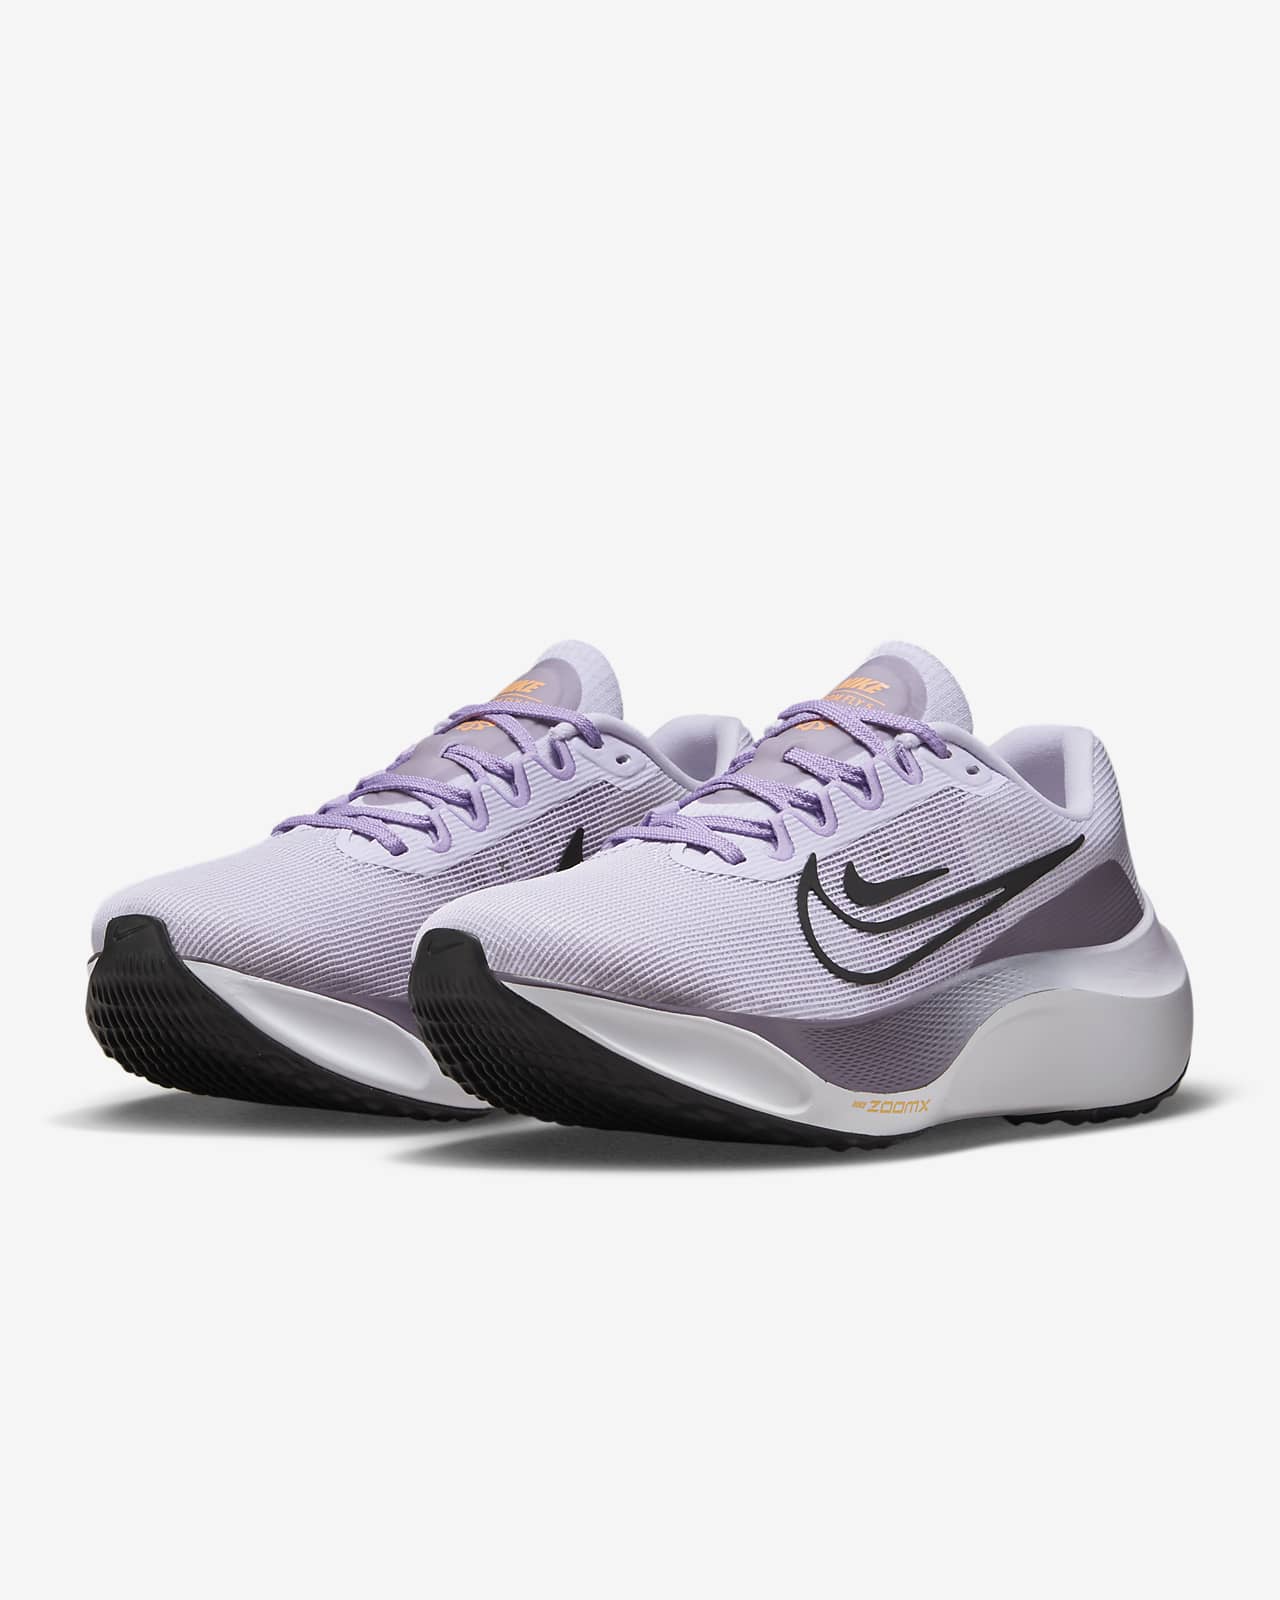 Zoom Fly 5 Women's Road Running Shoes. SK